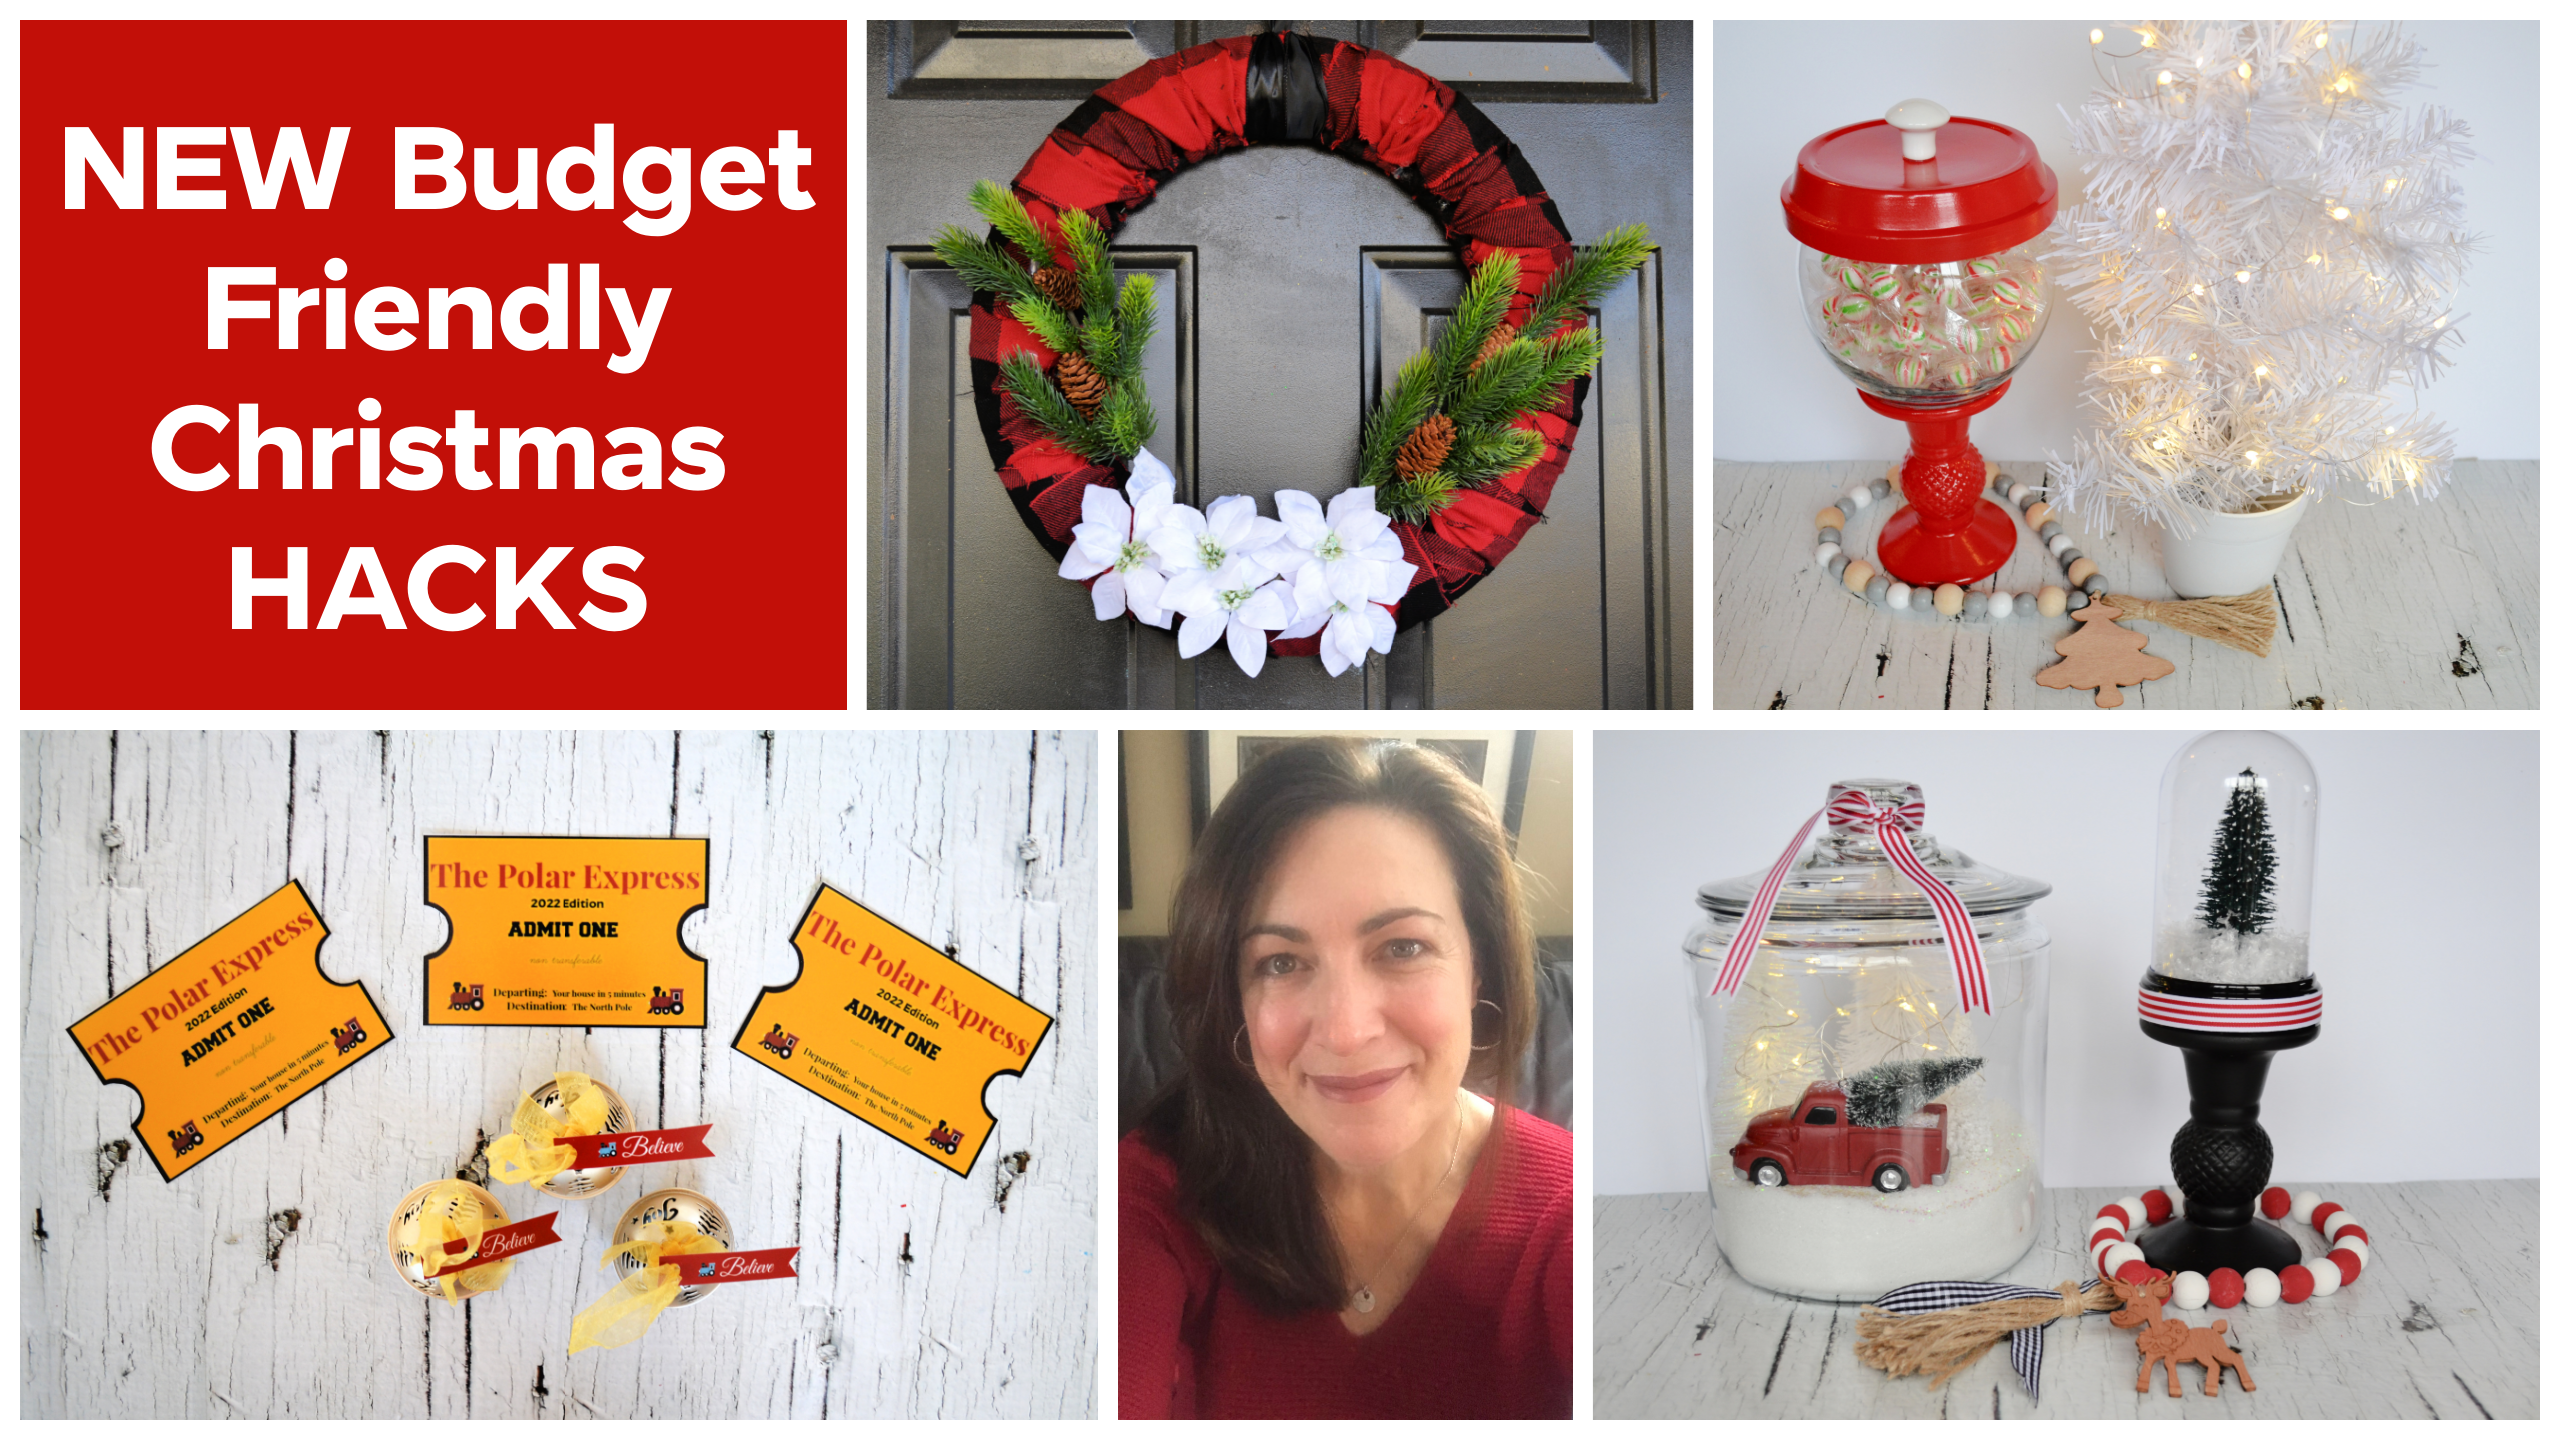 Let's make some easy peasy Christmas Cabinet wreaths